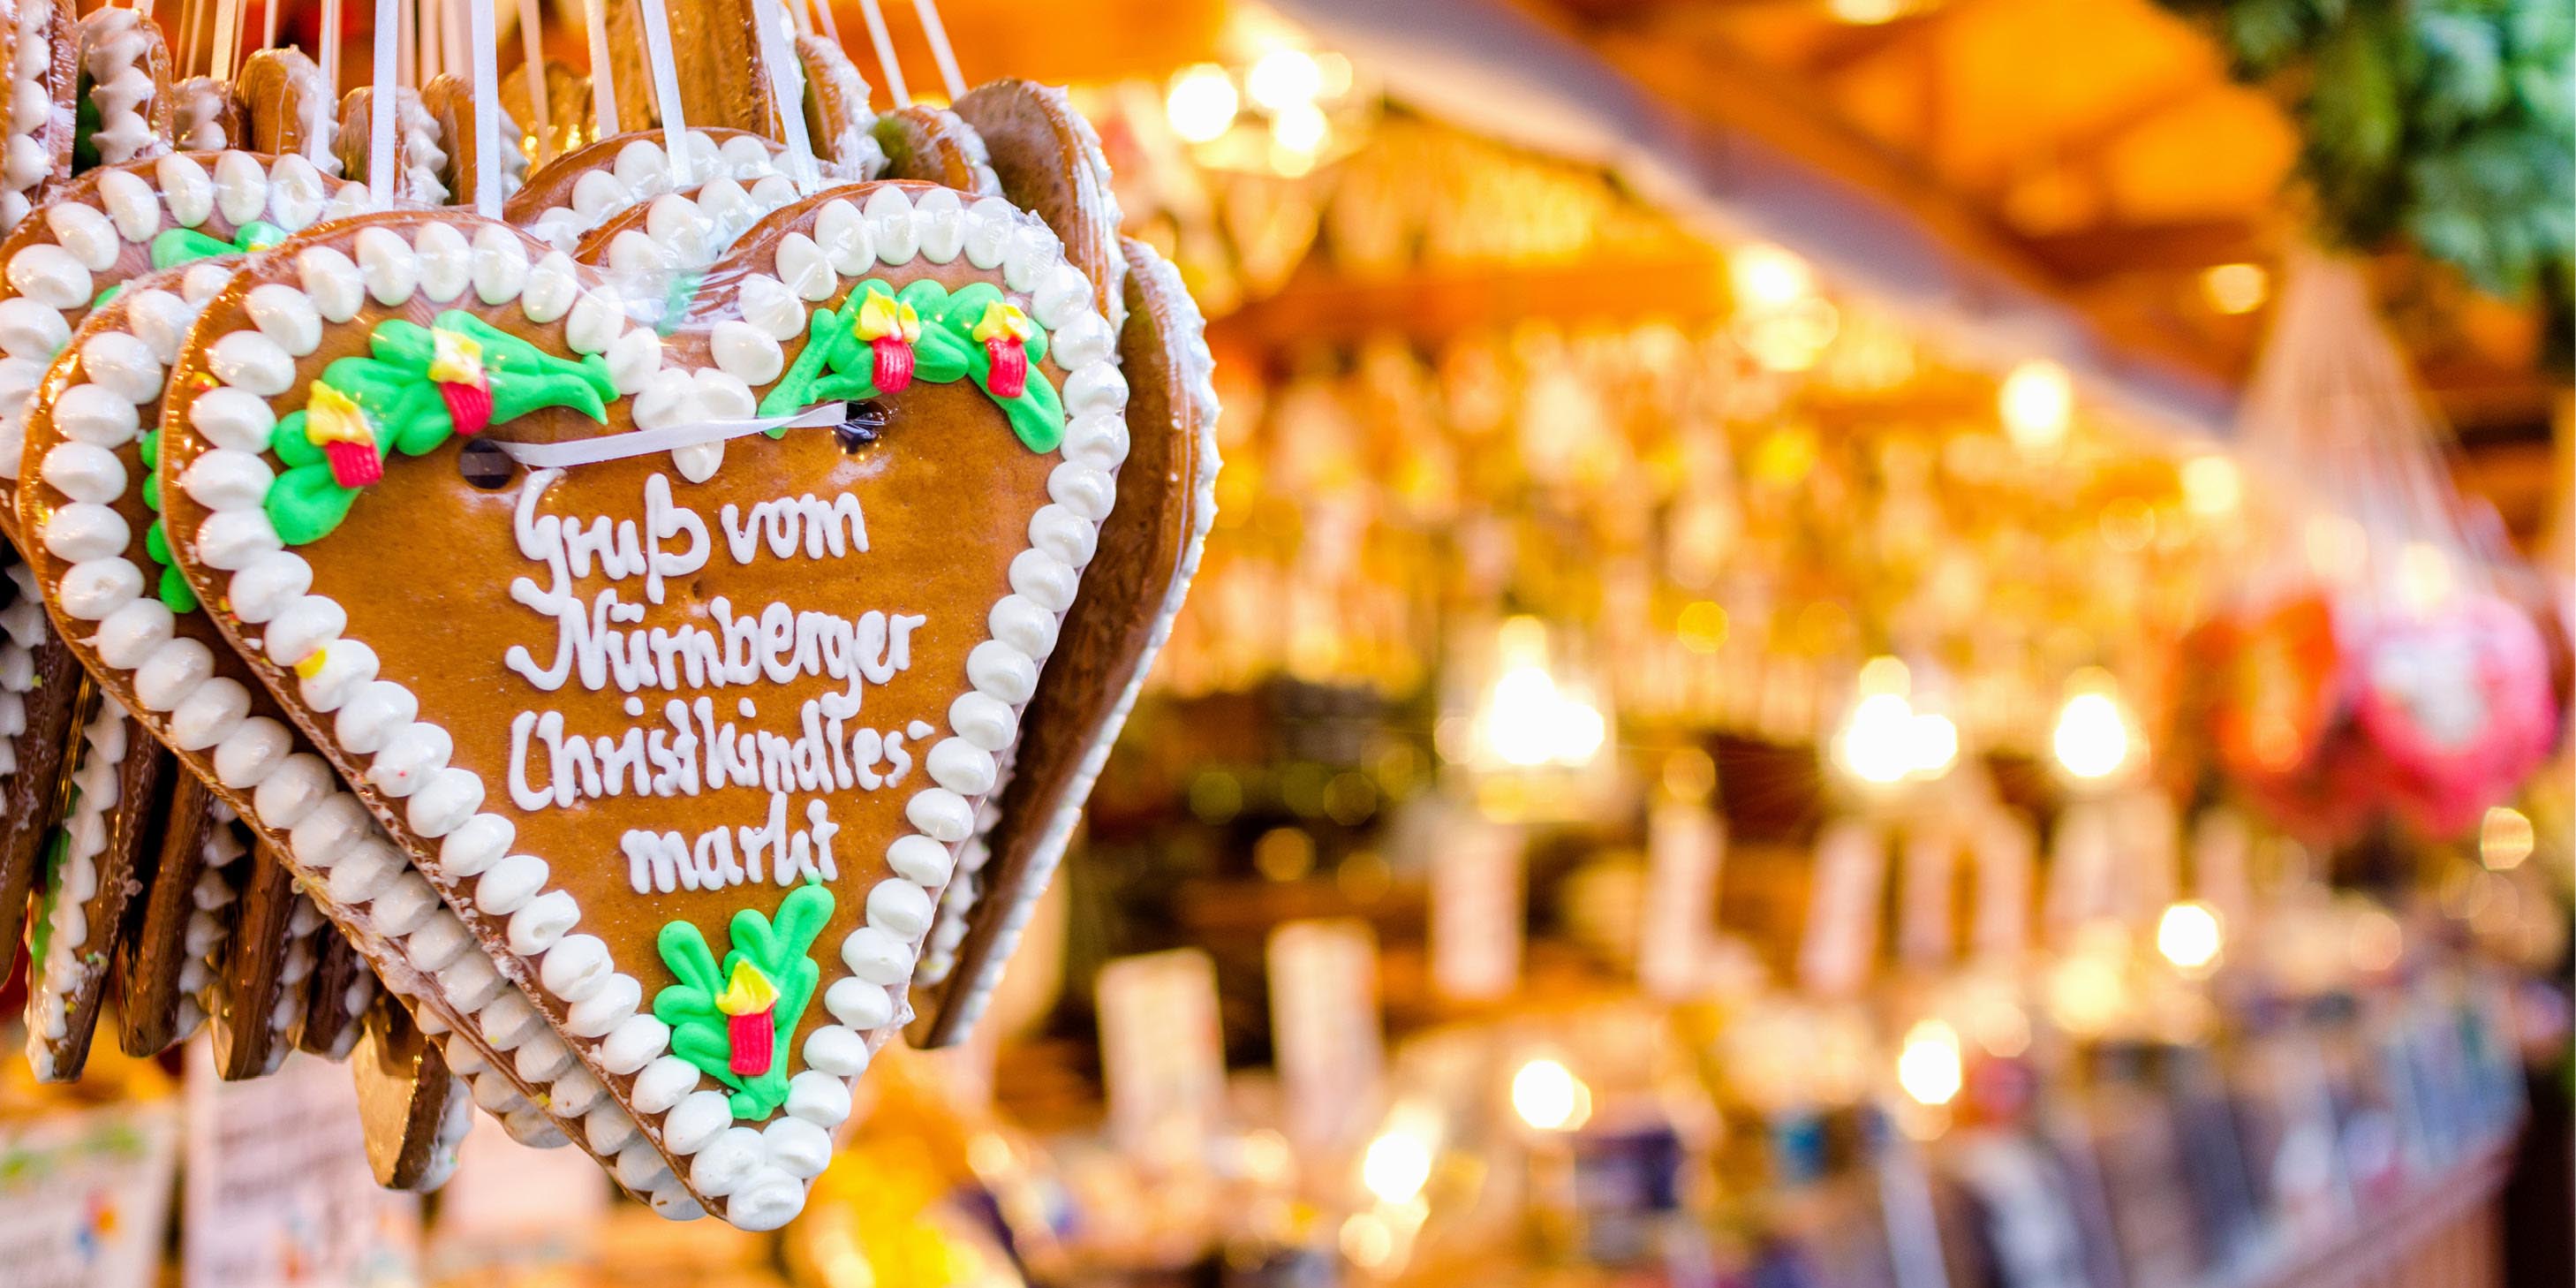 Christmas Market stall with hanging gingerbread